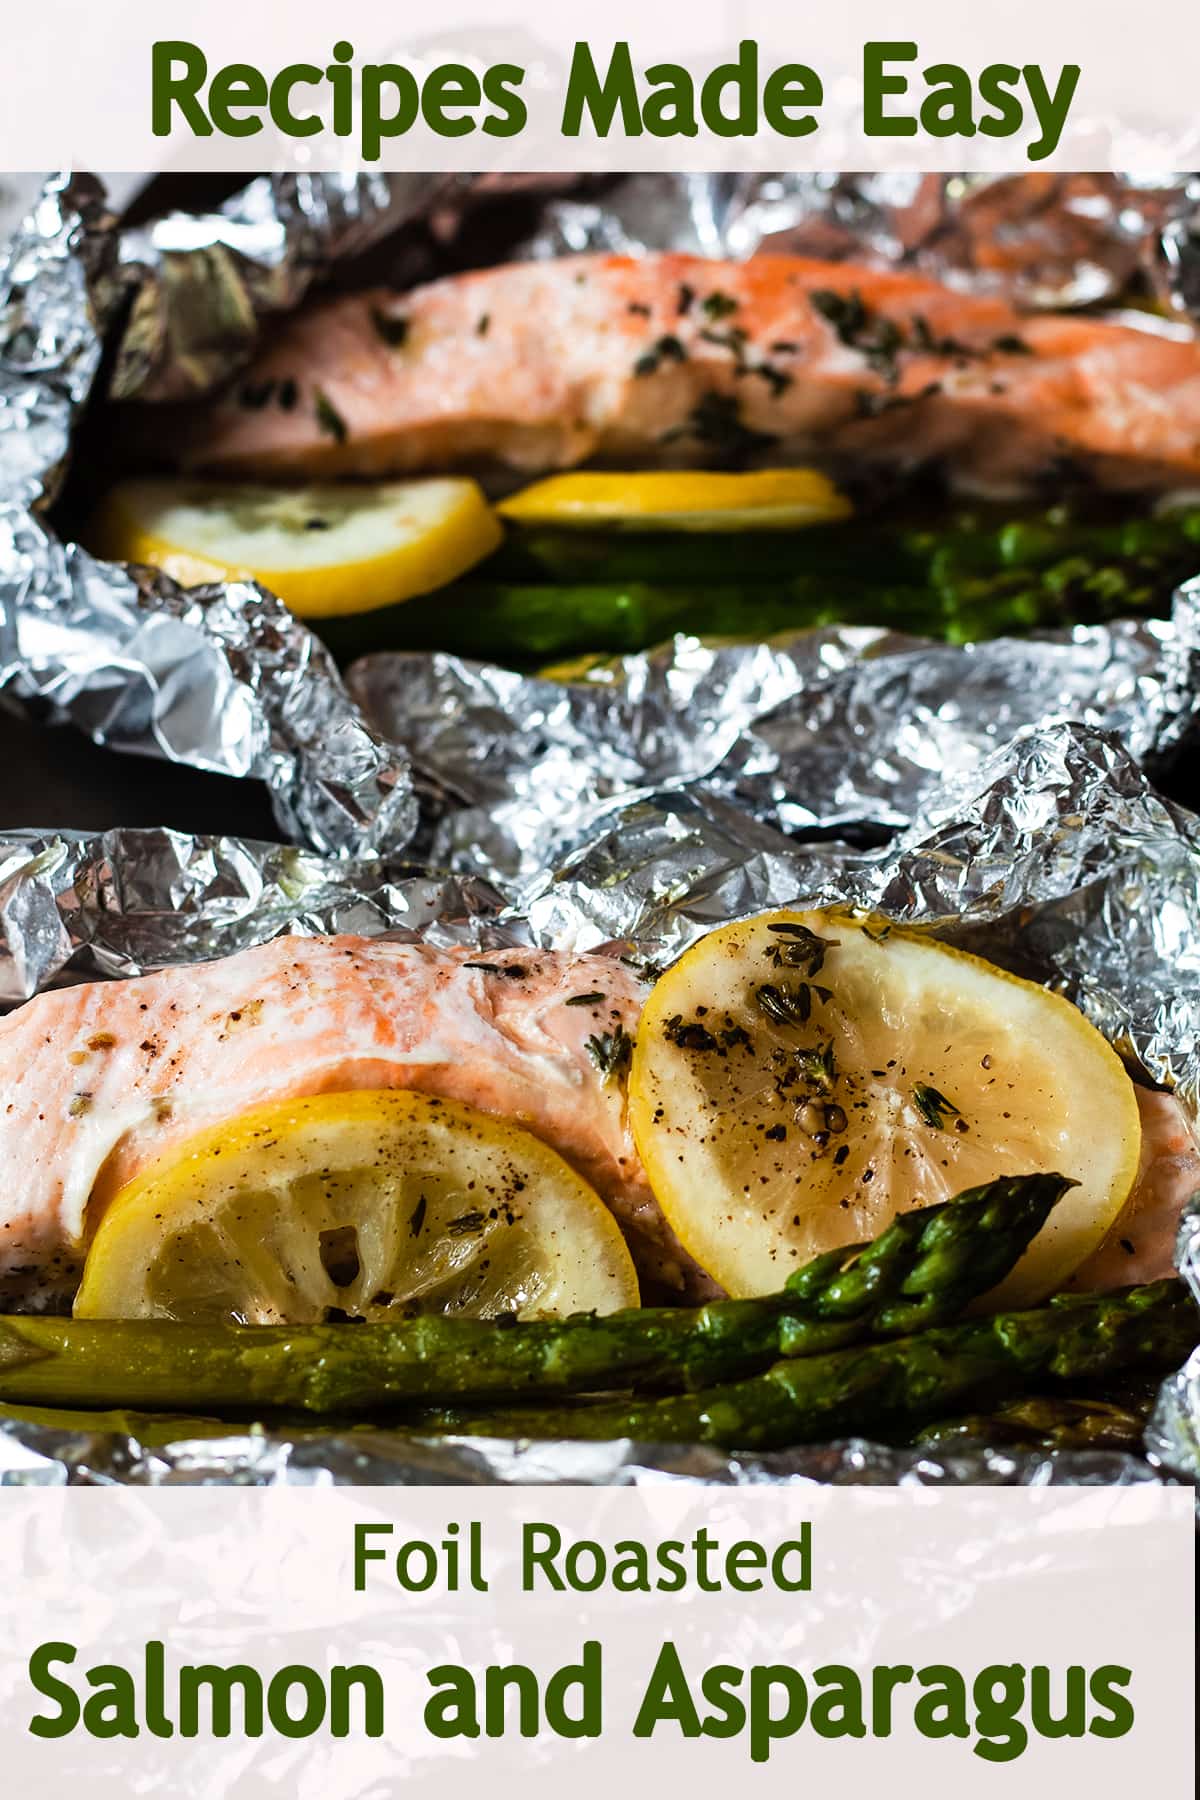 Foil baked salmon and asparagus | Recipes Made Easy